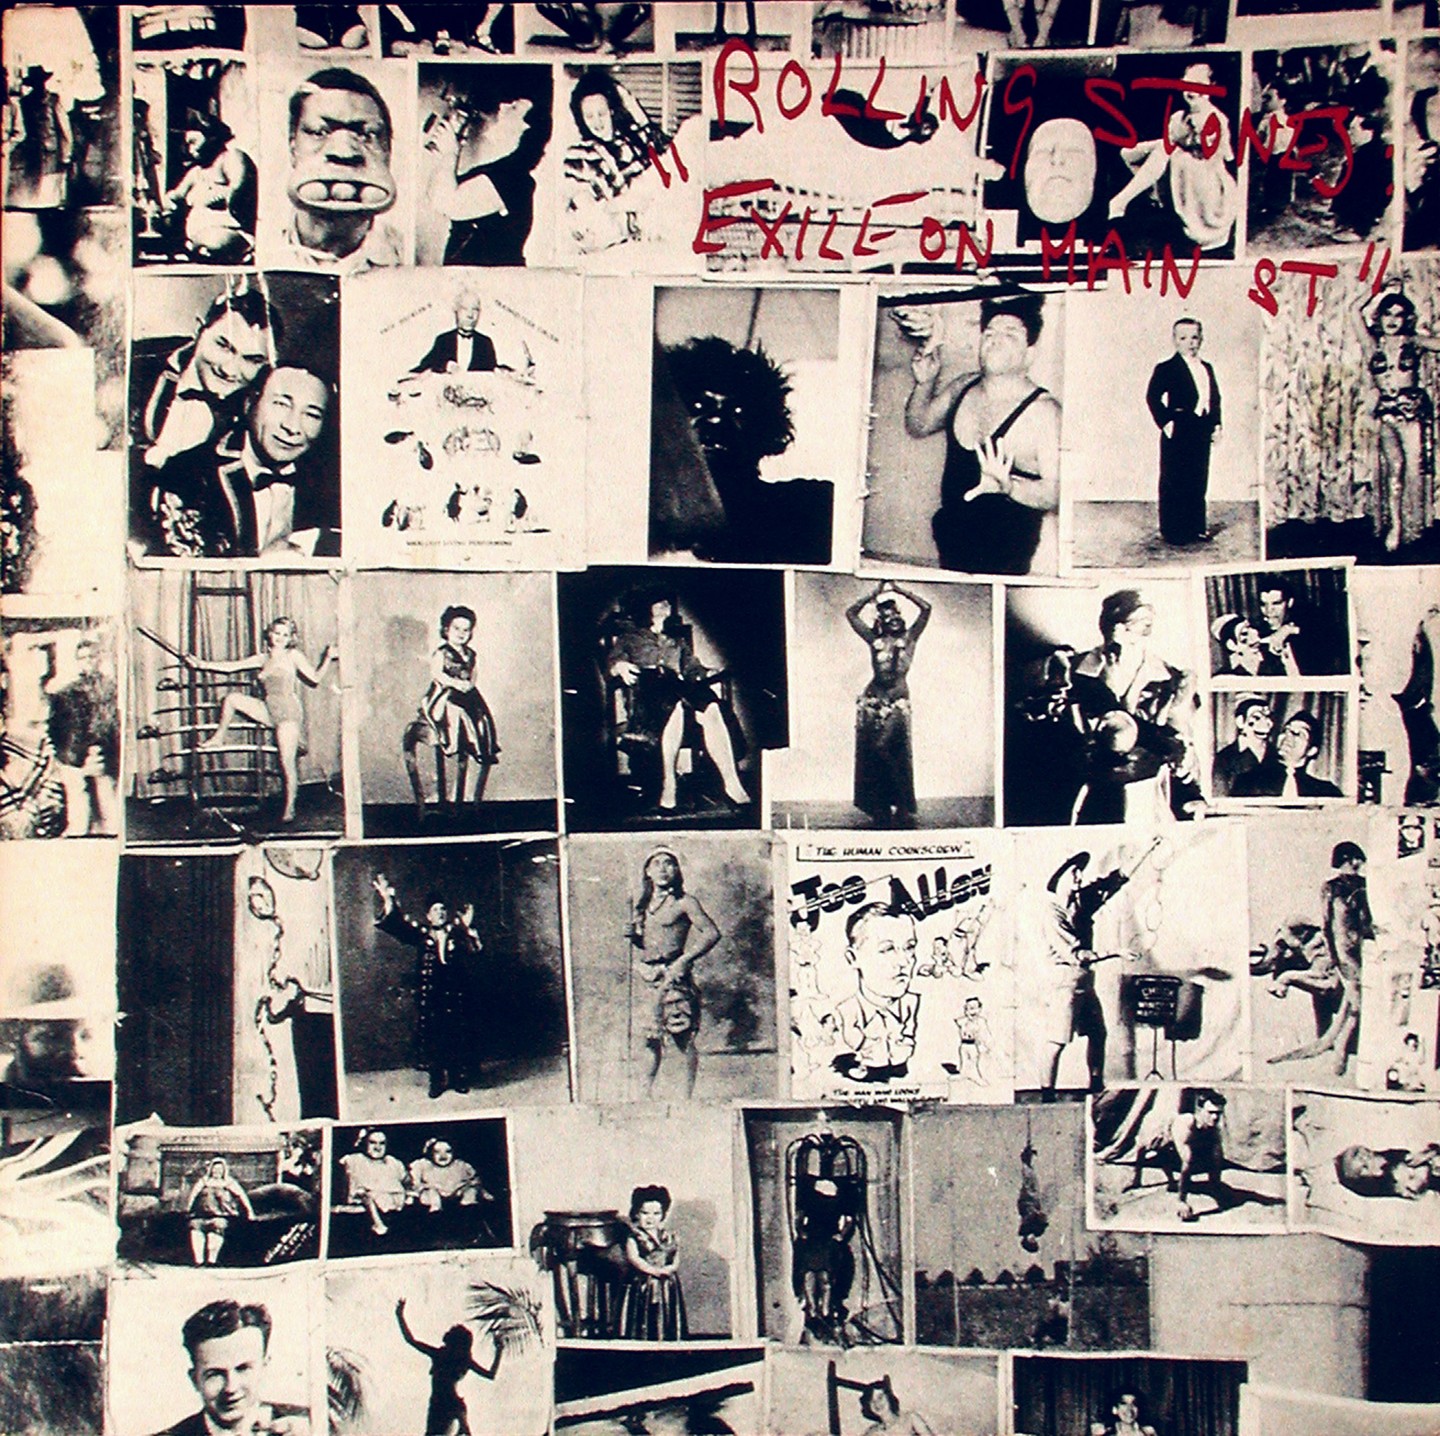 Exile on Main St by The Rolling Stones